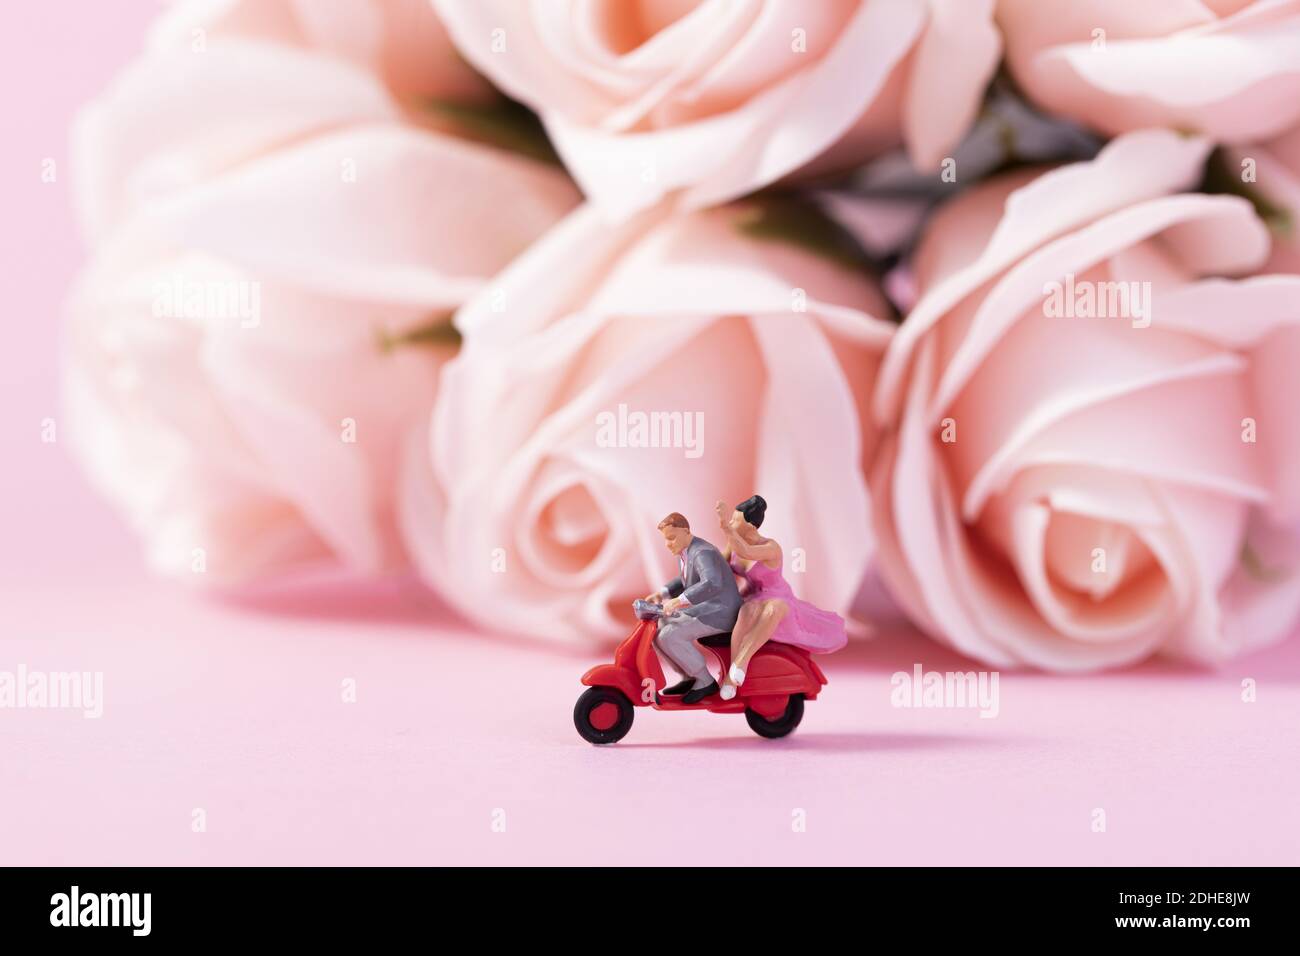 A creative shot of Valentine's day romantic doll couple on a ...